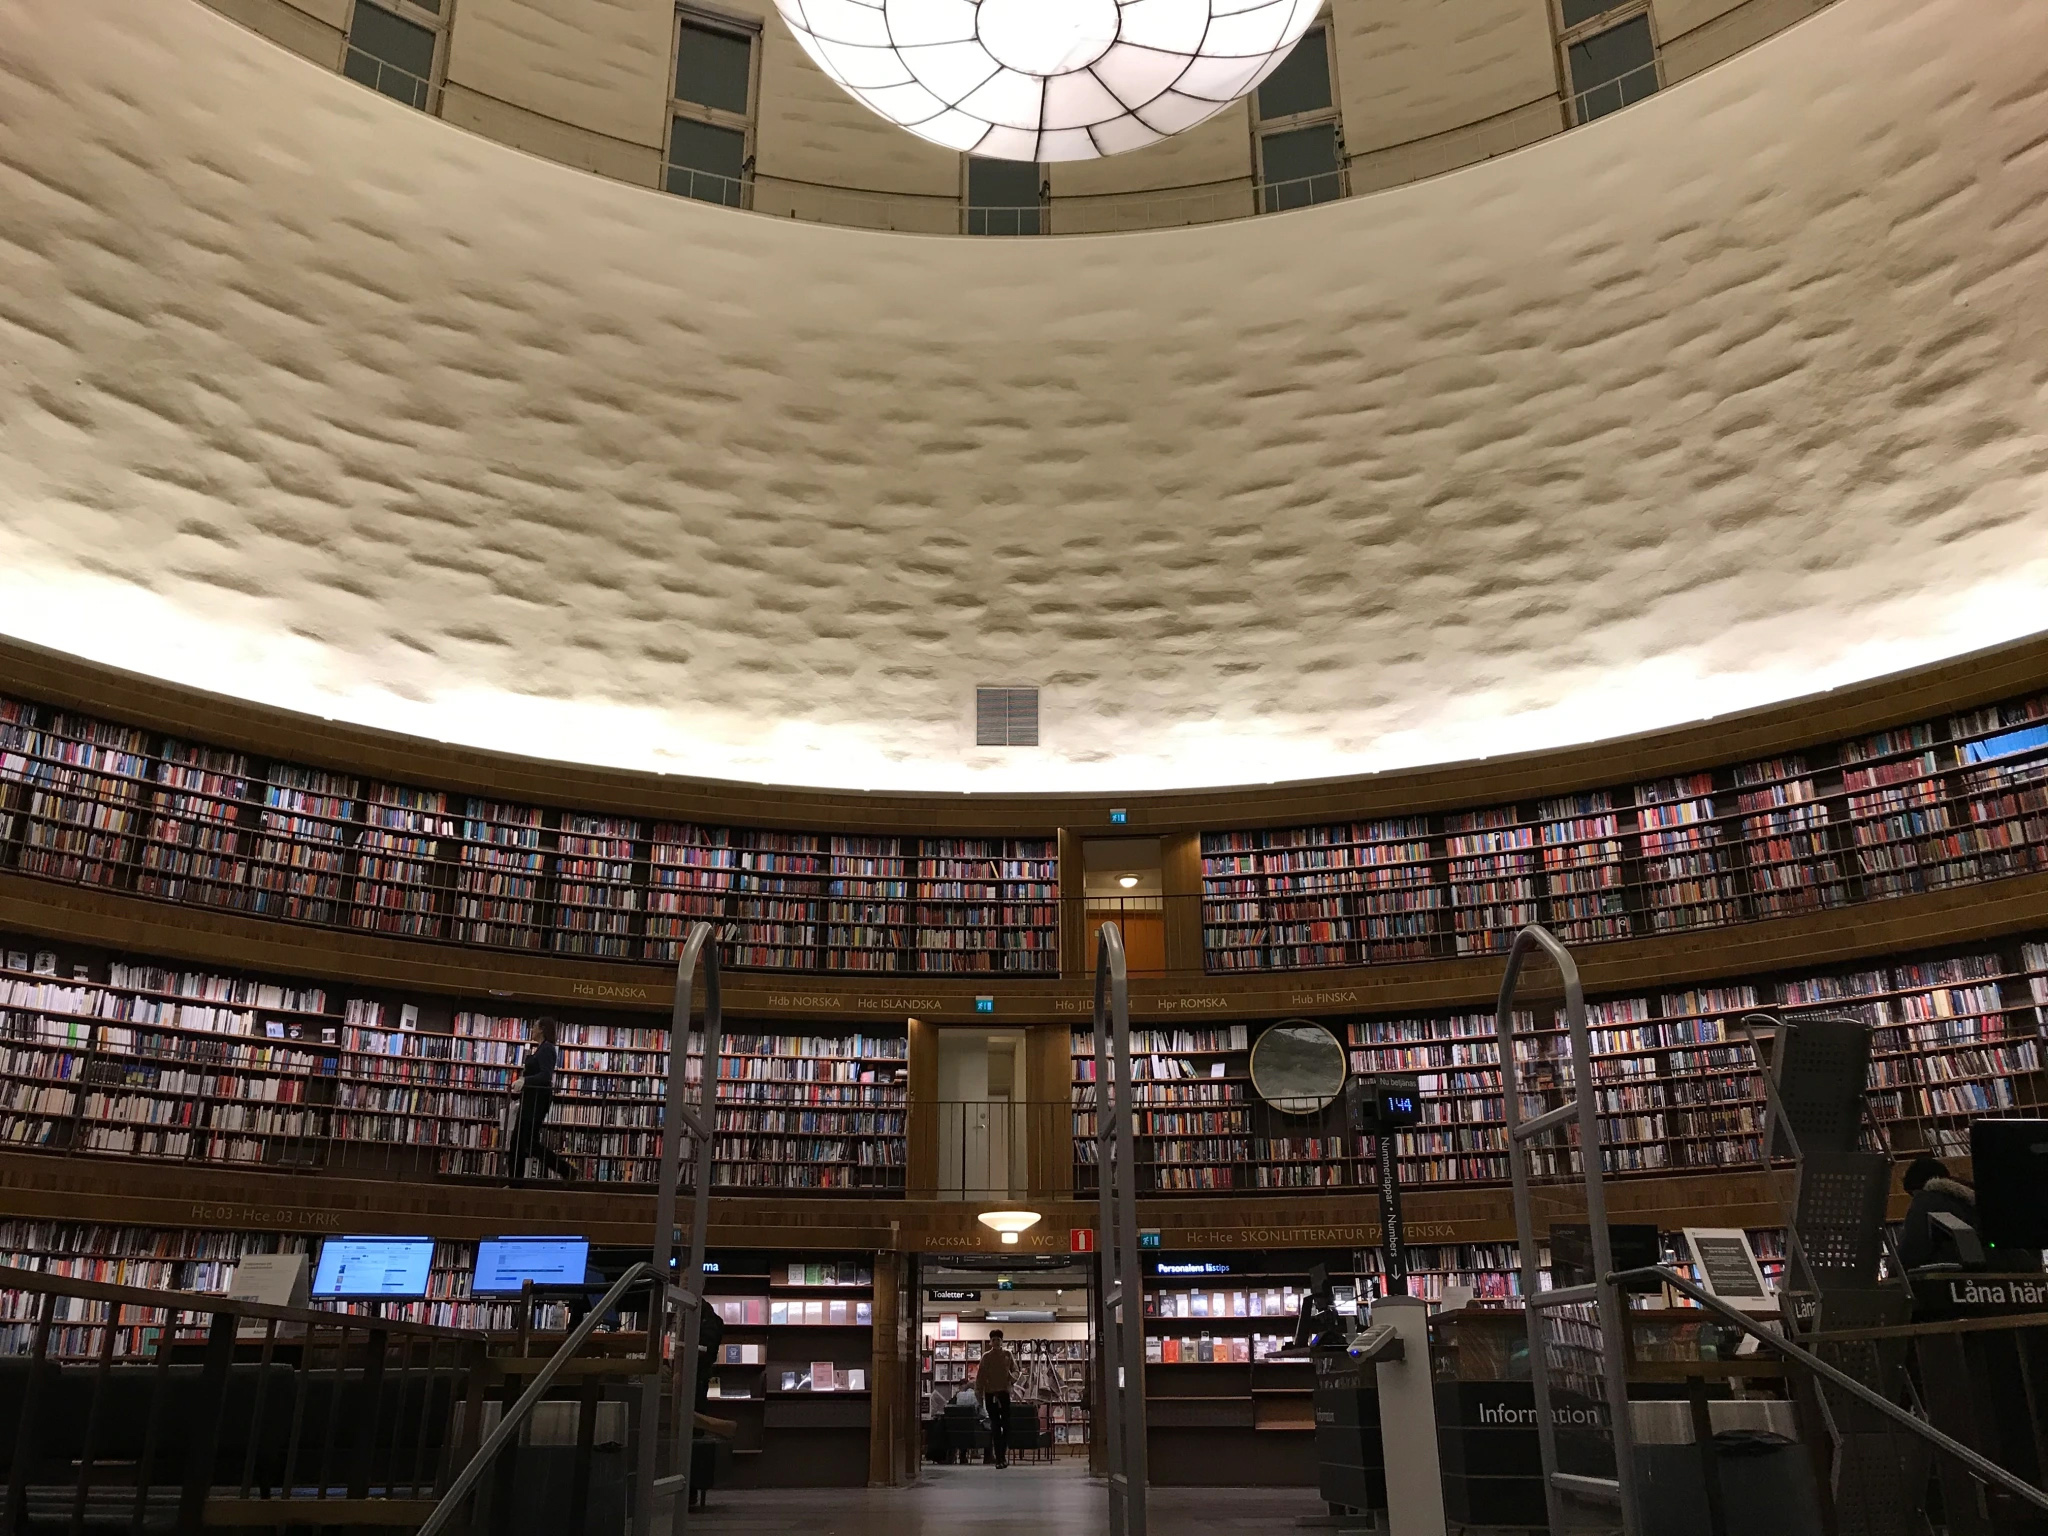 Interior of library reading room.